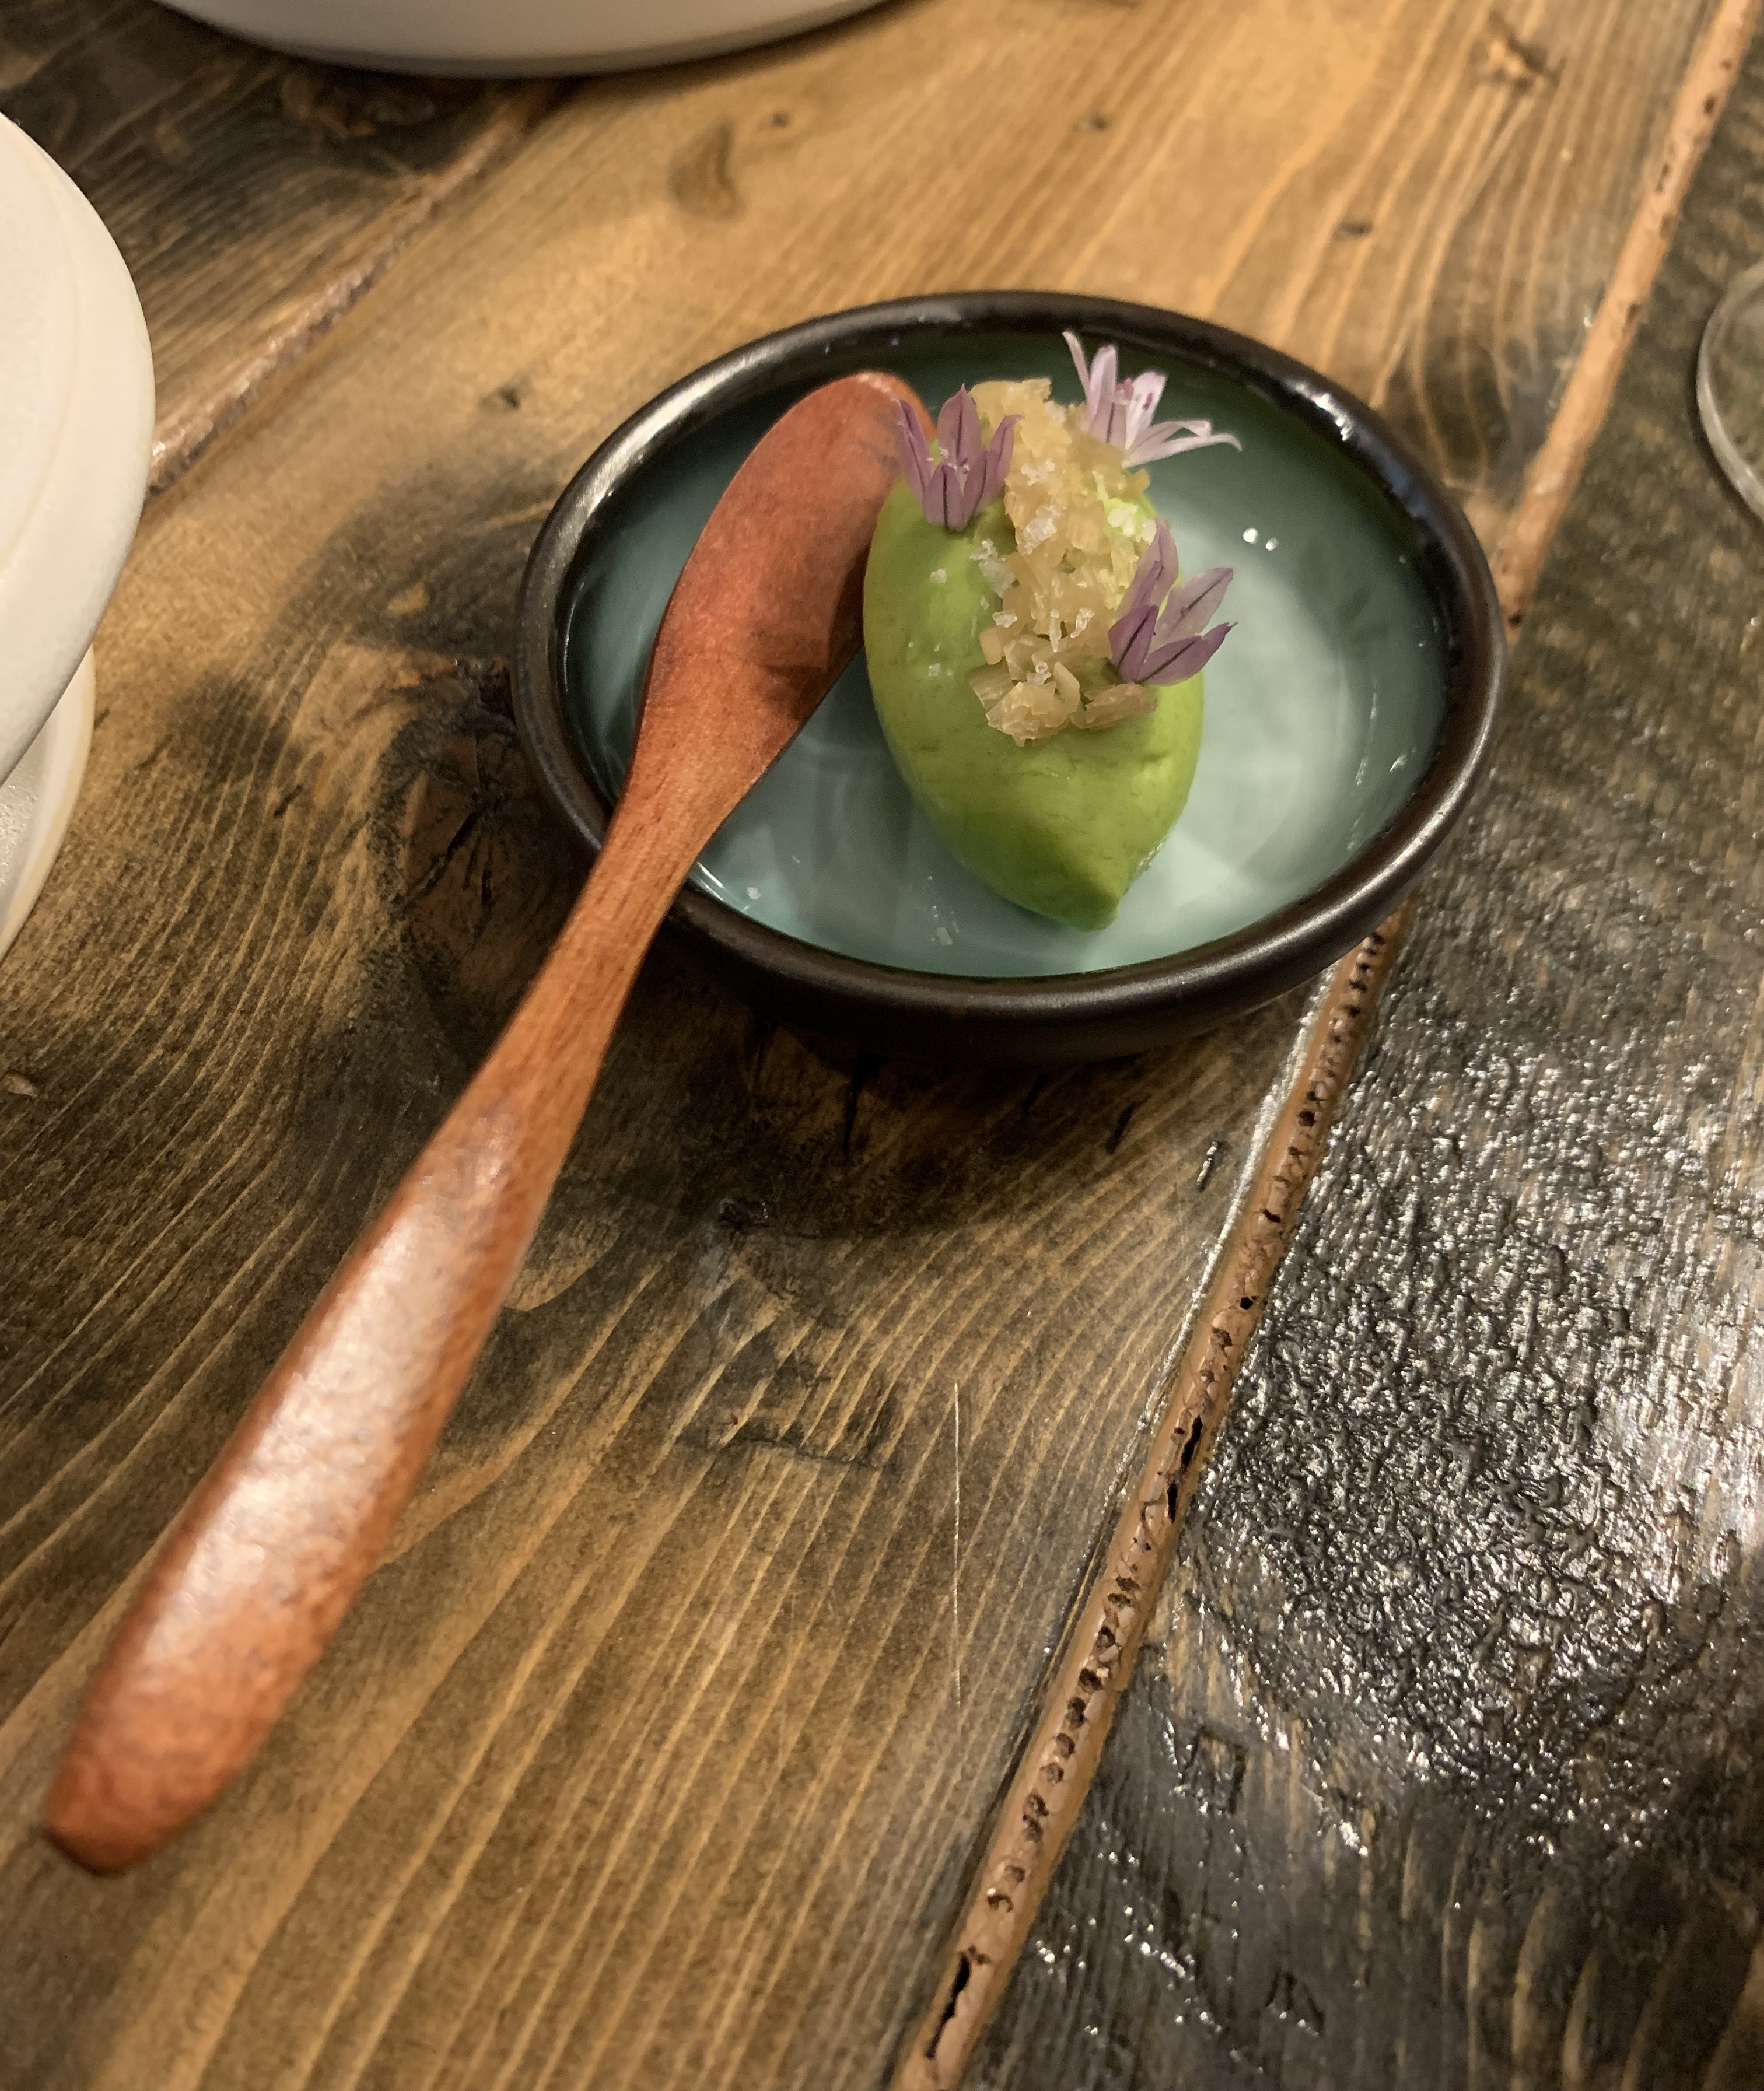 Quenelle of green butter, topped with small purple flowers. Served on a tiny round plate with a lacquered wooden paddle for spreading.